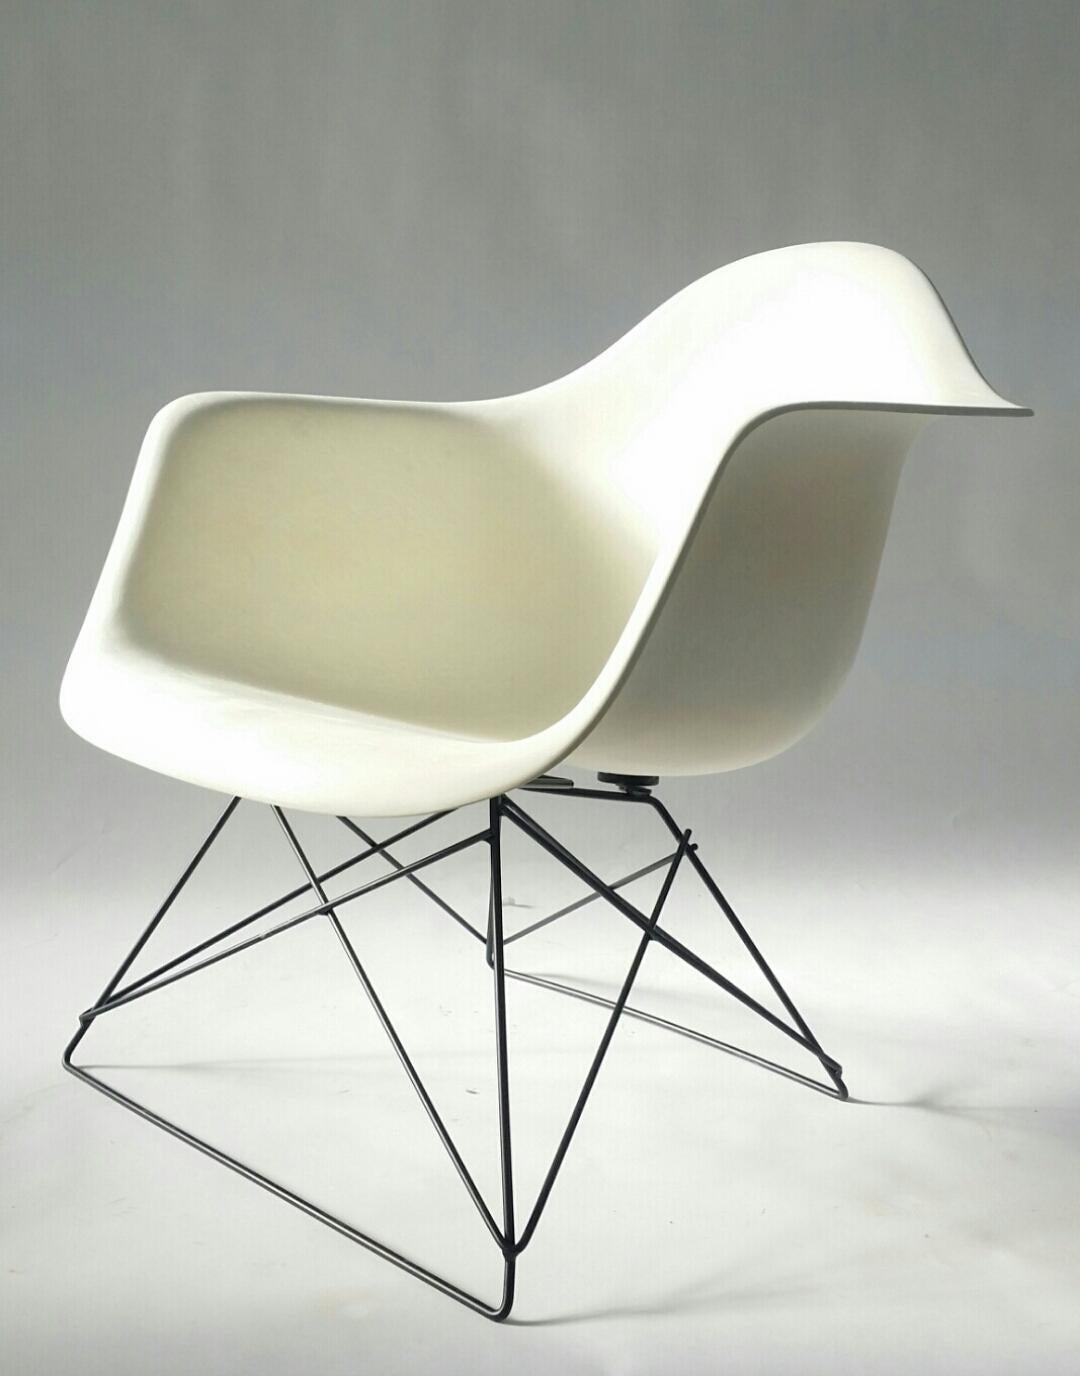 White Eames arm shell chair, produced by Herman Miller, circa 1972, on black 'cats cradle' base. We would describe this Eames fiberglass arm shell as 